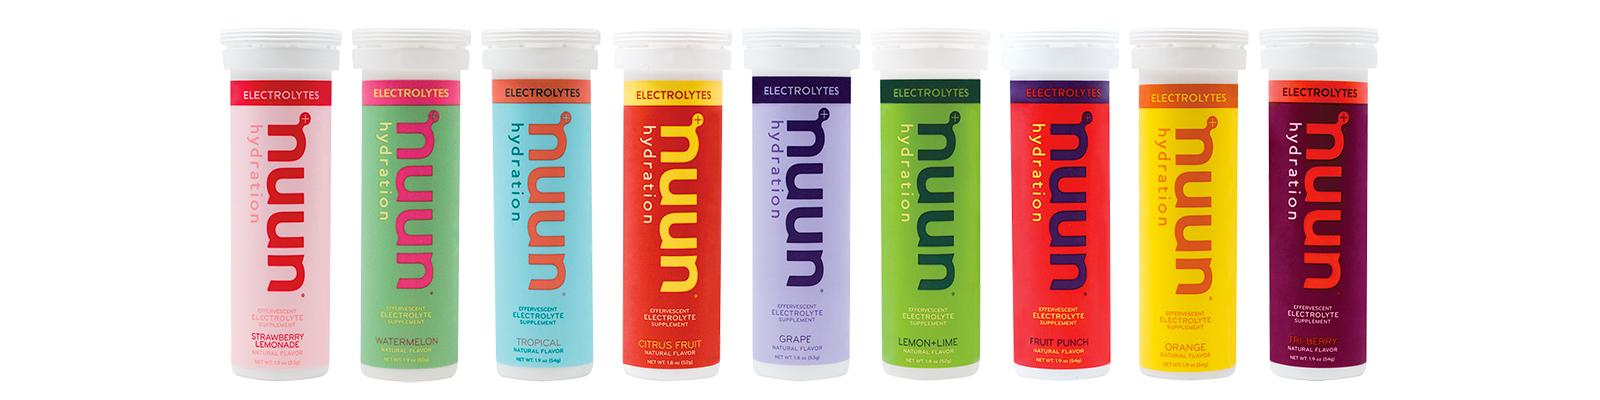 TSG Consumer Partners Completes Investment In Nuun — TSG Consumer